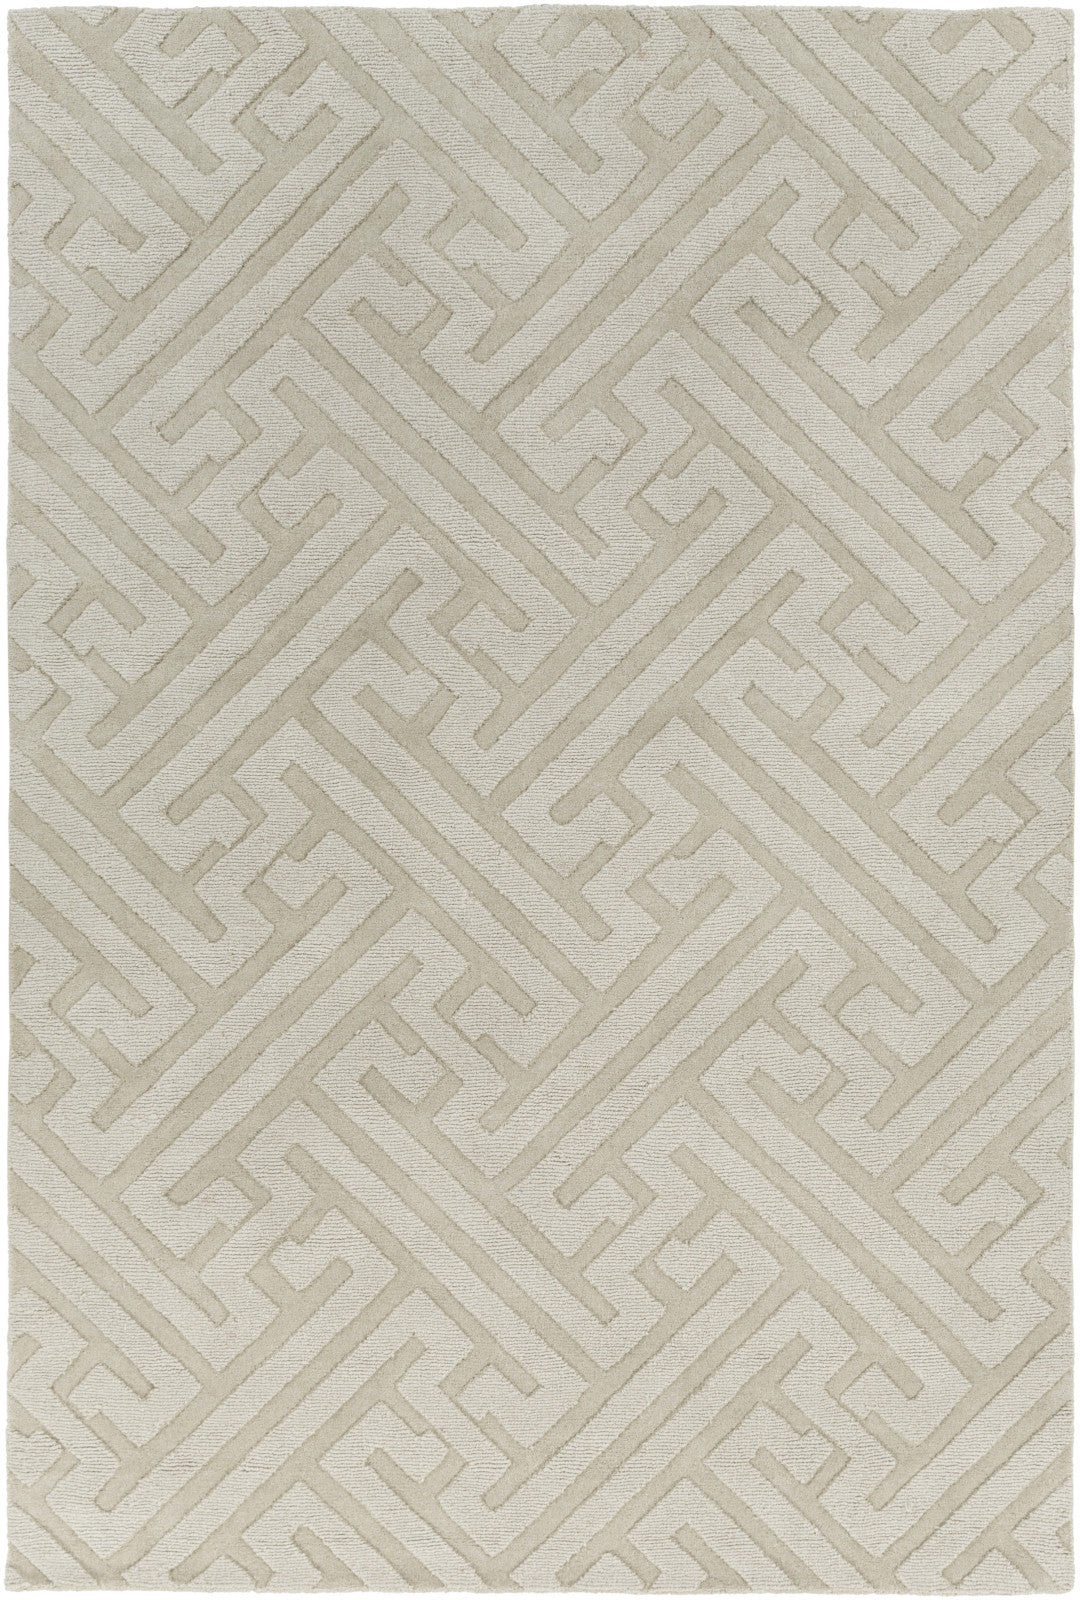 Surya The Oakes OAK-6008 Area Rug by Florence Broadhurst